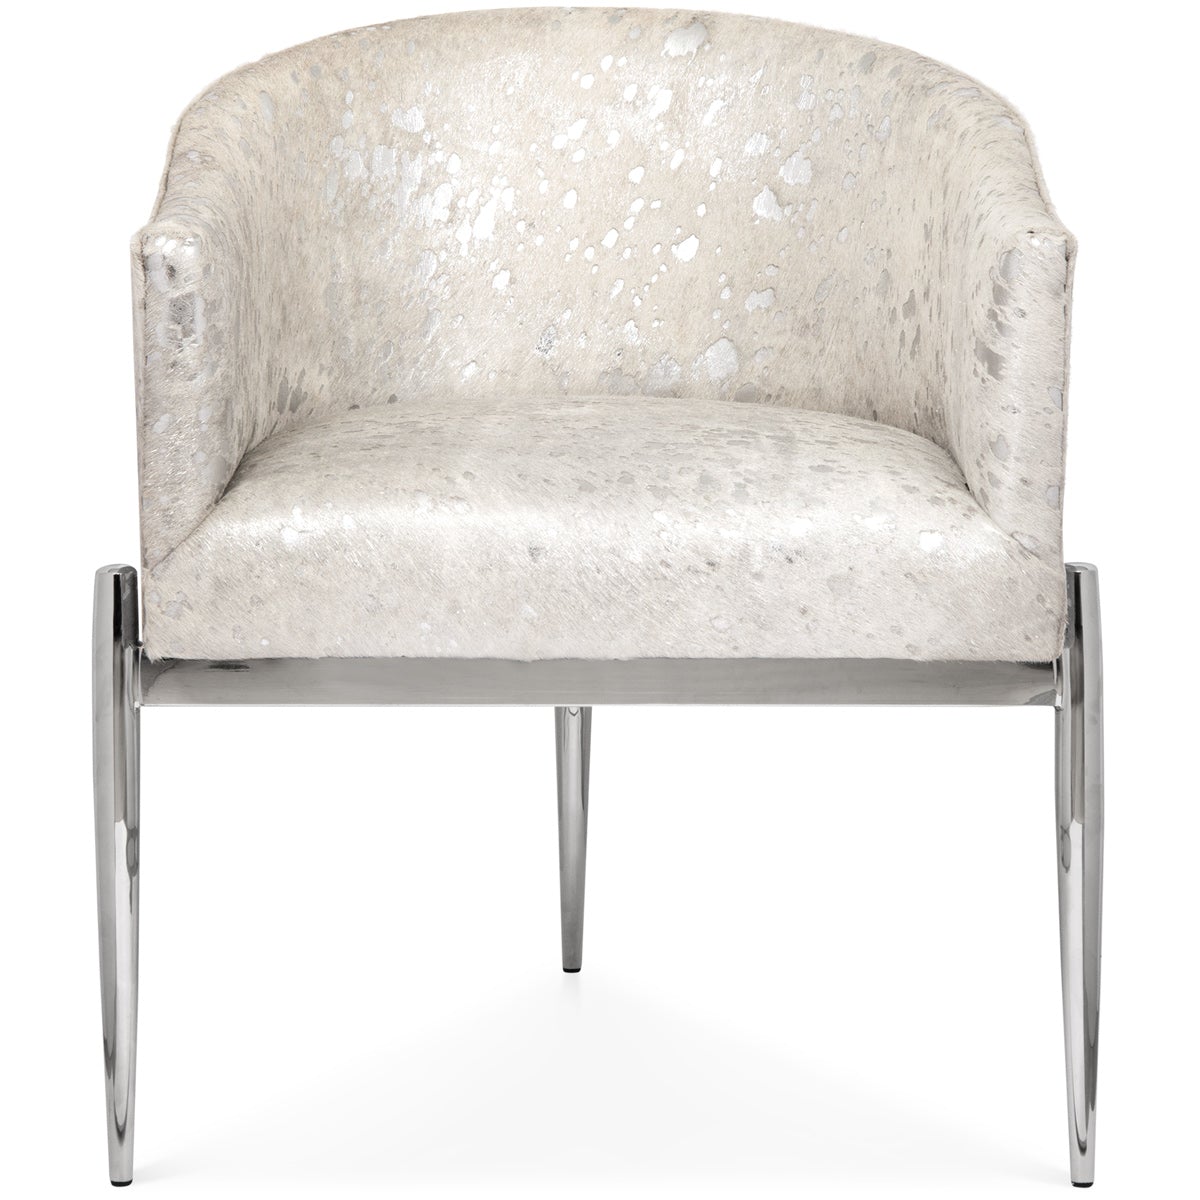 Art Deco Dining Chair in Silver Speckled Cowhide - ModShop1.com